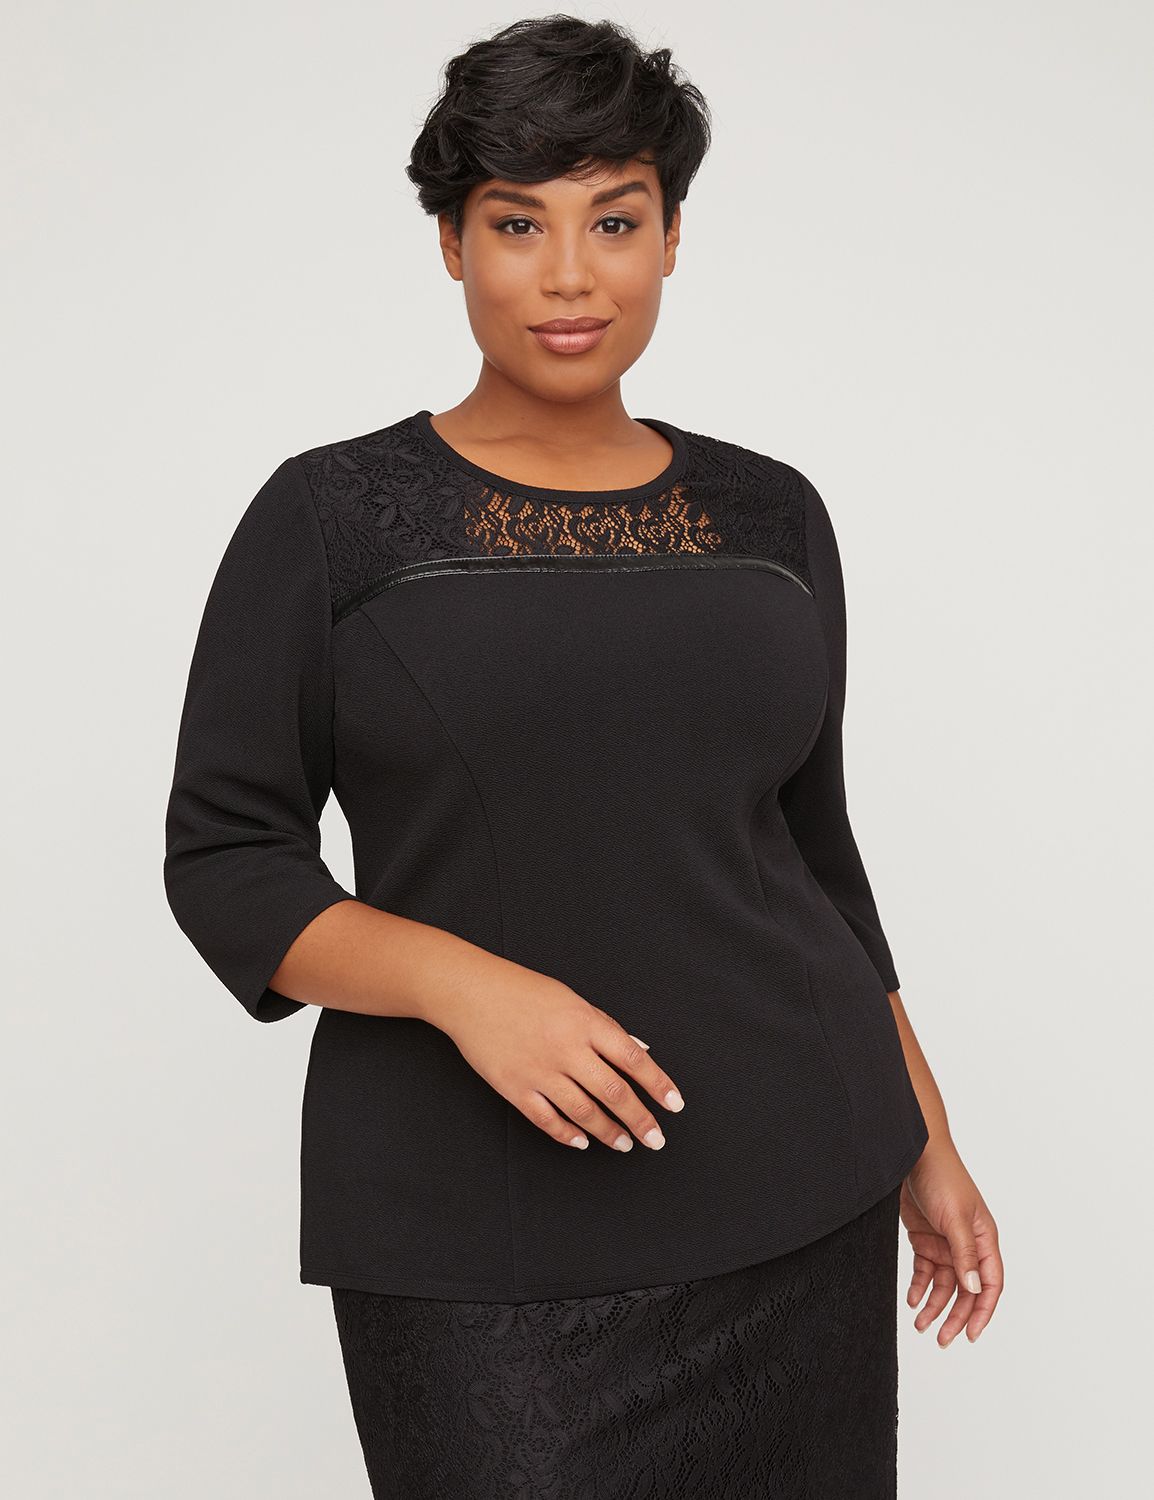 A soft top with sheer lace and faux leather accenting the front yoke. Princess seams and slightly textured fabric for a polished silhouette. Scoop neck. Three-quarter sleeves. Complete your look with our Black Label Lace Skirt. Item Number #315898, 96% Polyester/4% Spandex, Machine Wash, Imported Plus Size Black Label, Length: 29" , Plus Sizes 0X-5X, Petite Plus Sizes 0XWP-3XWP, Catherines Plus Sizes